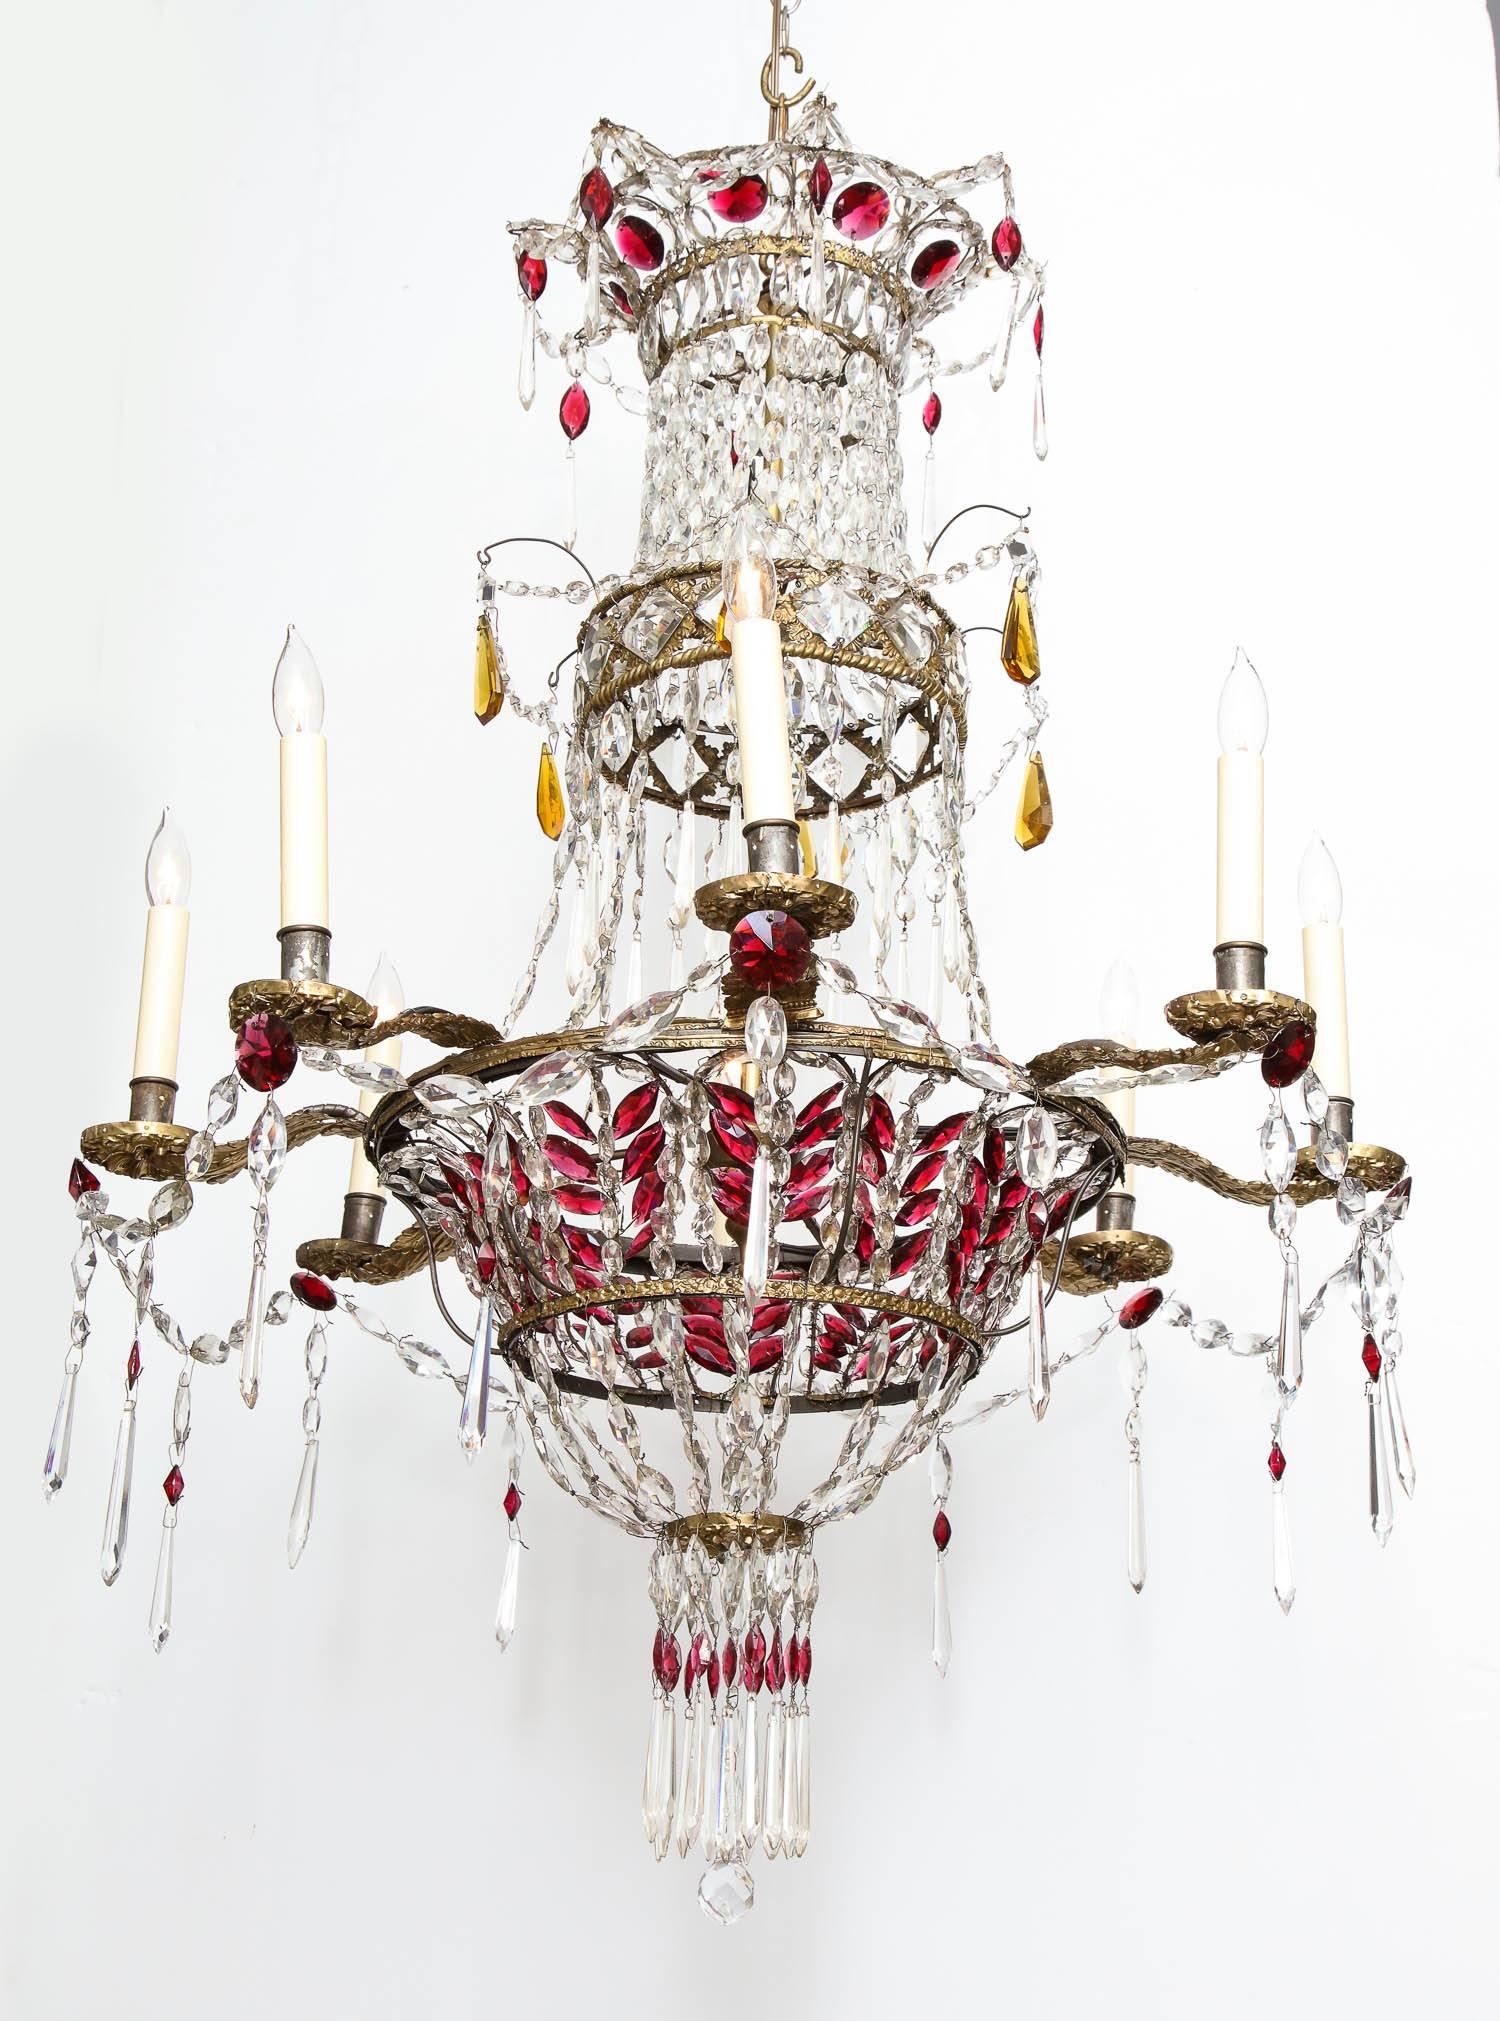 Elegant and decorative early 19th century Gustavian neoclassical eight-light chandelier, having cranberry, amber and clear crystal drops, the frame and arms decorated with repousse lacquered gilt brass mounts on an iron and wirework frame, now wired